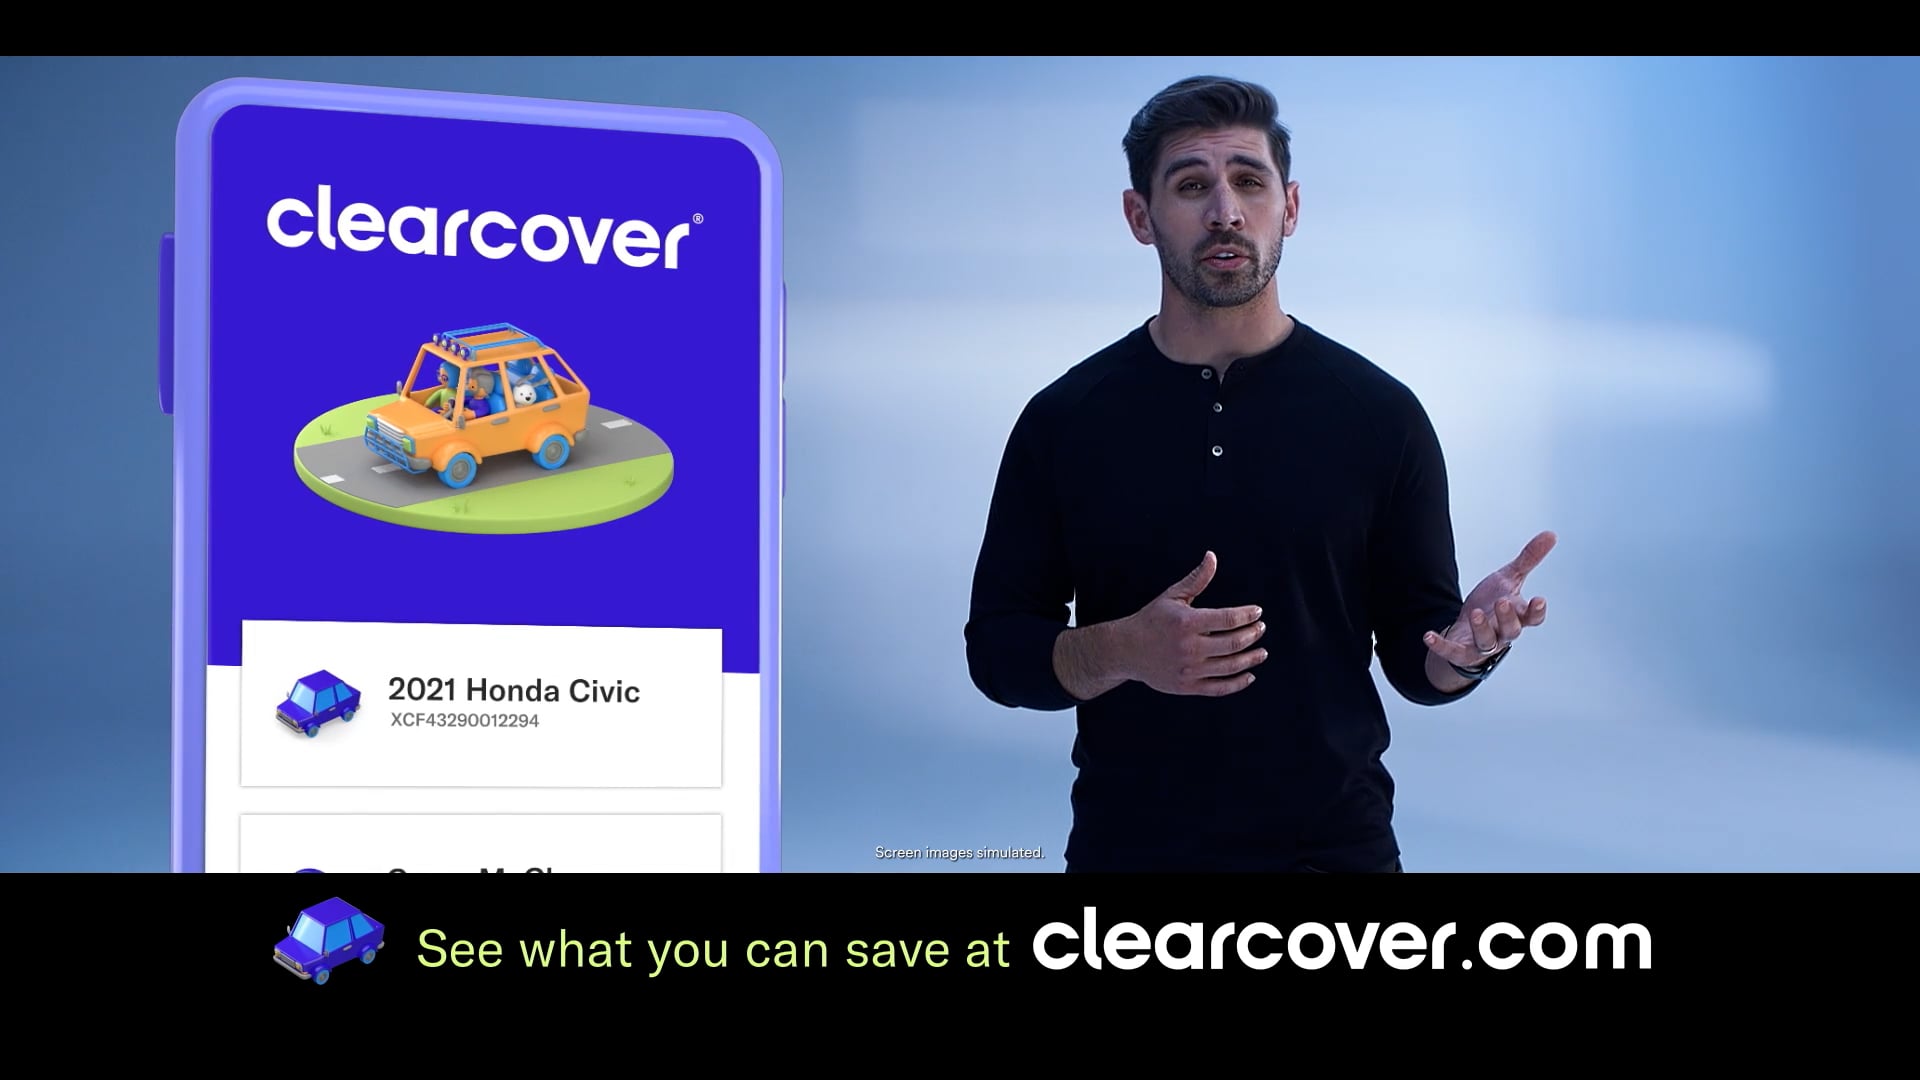 Clearcover: This Is Clearcover